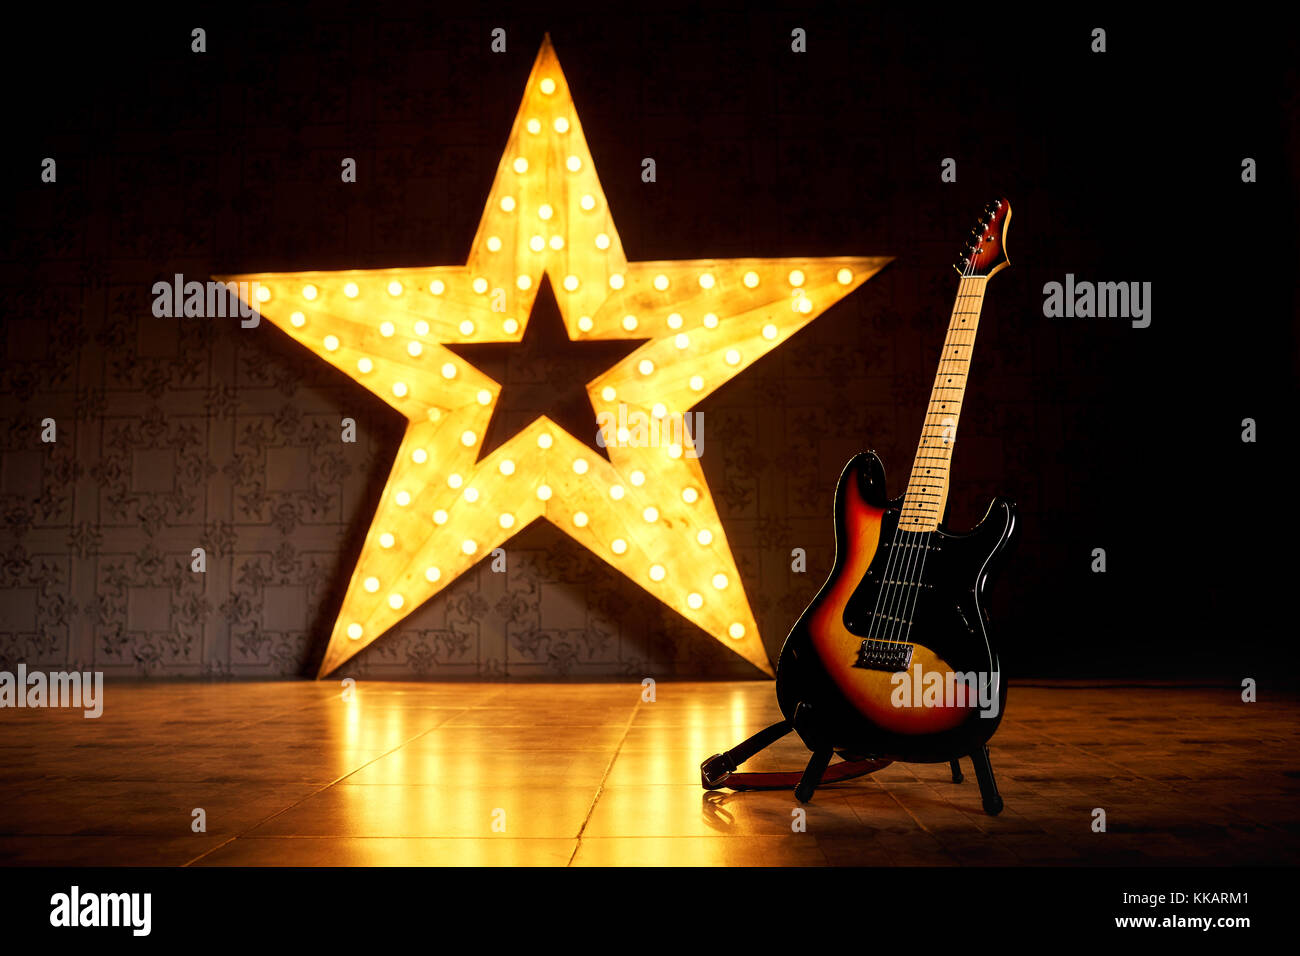 An electric guitar on the background of a large electric star. Stock Photo